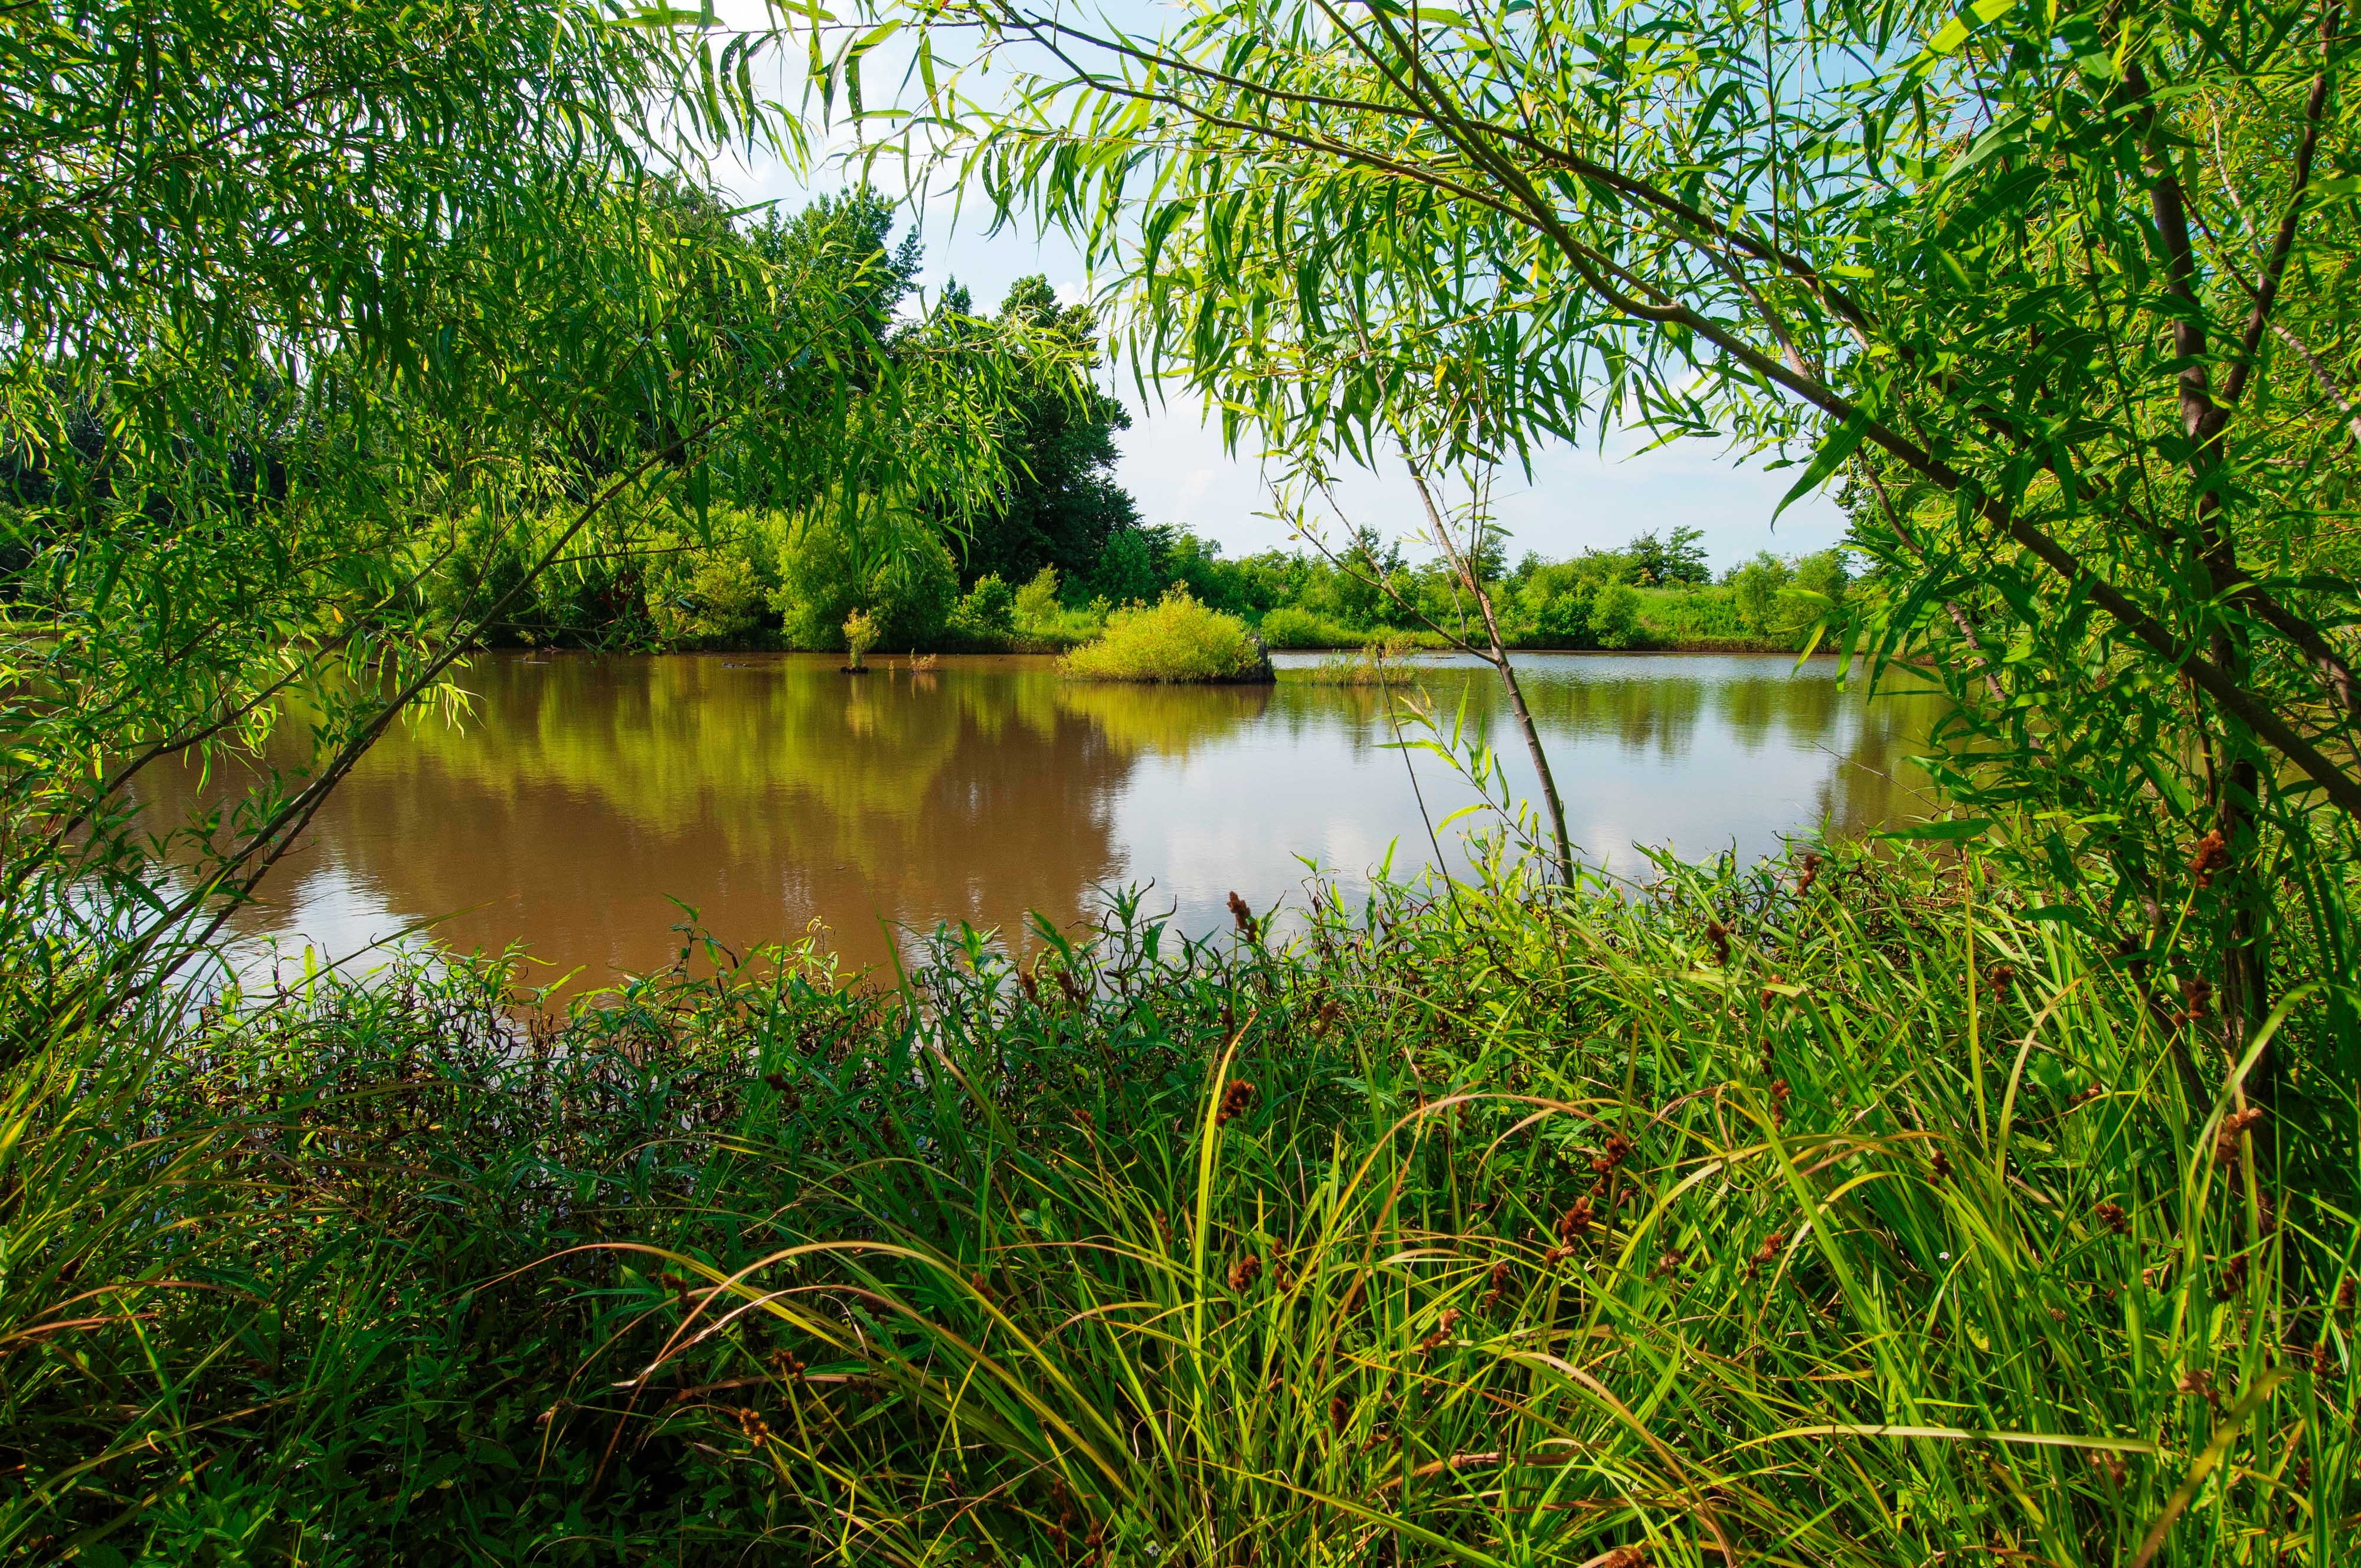 Lush vegetation frames a pond and its wetland surroundings.